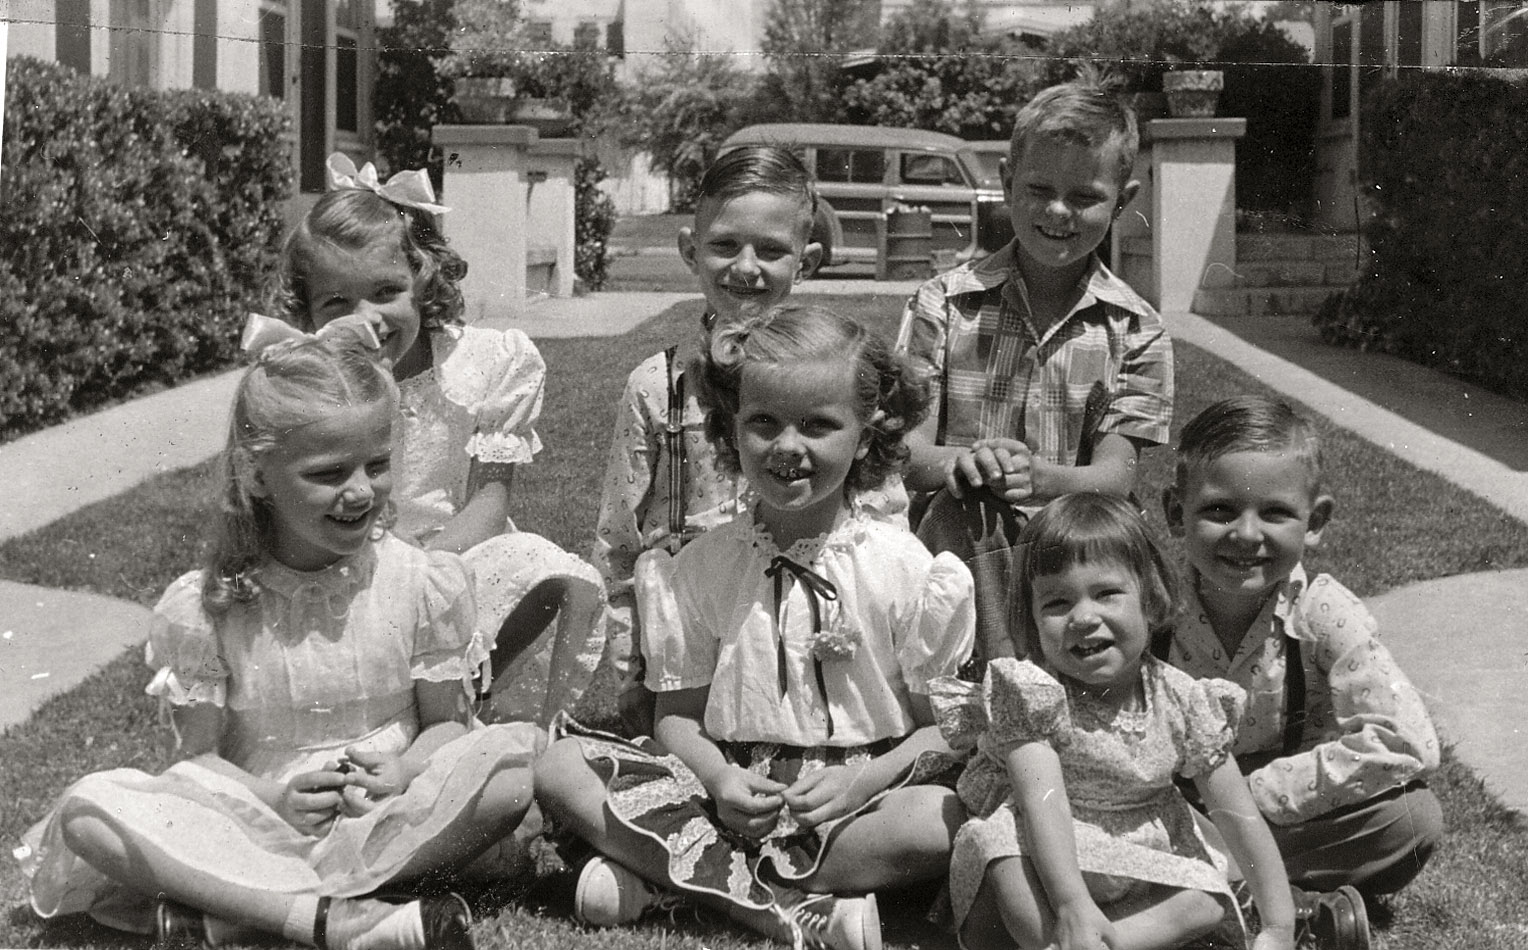 My dad around 8 years old or so, which would make this around 1946. He's in the back row on the right. My Aunt Susan is second from left, front row. Not sure exactly where it was taken other than somewhere in Los Angeles. I am thinking the other kids are cousins but I don't know their names. Or just friends. Just amazed you can get a group of kids to sit still while you snap a picture of them. I'd love to have the car in the background. View full size. [Where is this? - Dave]